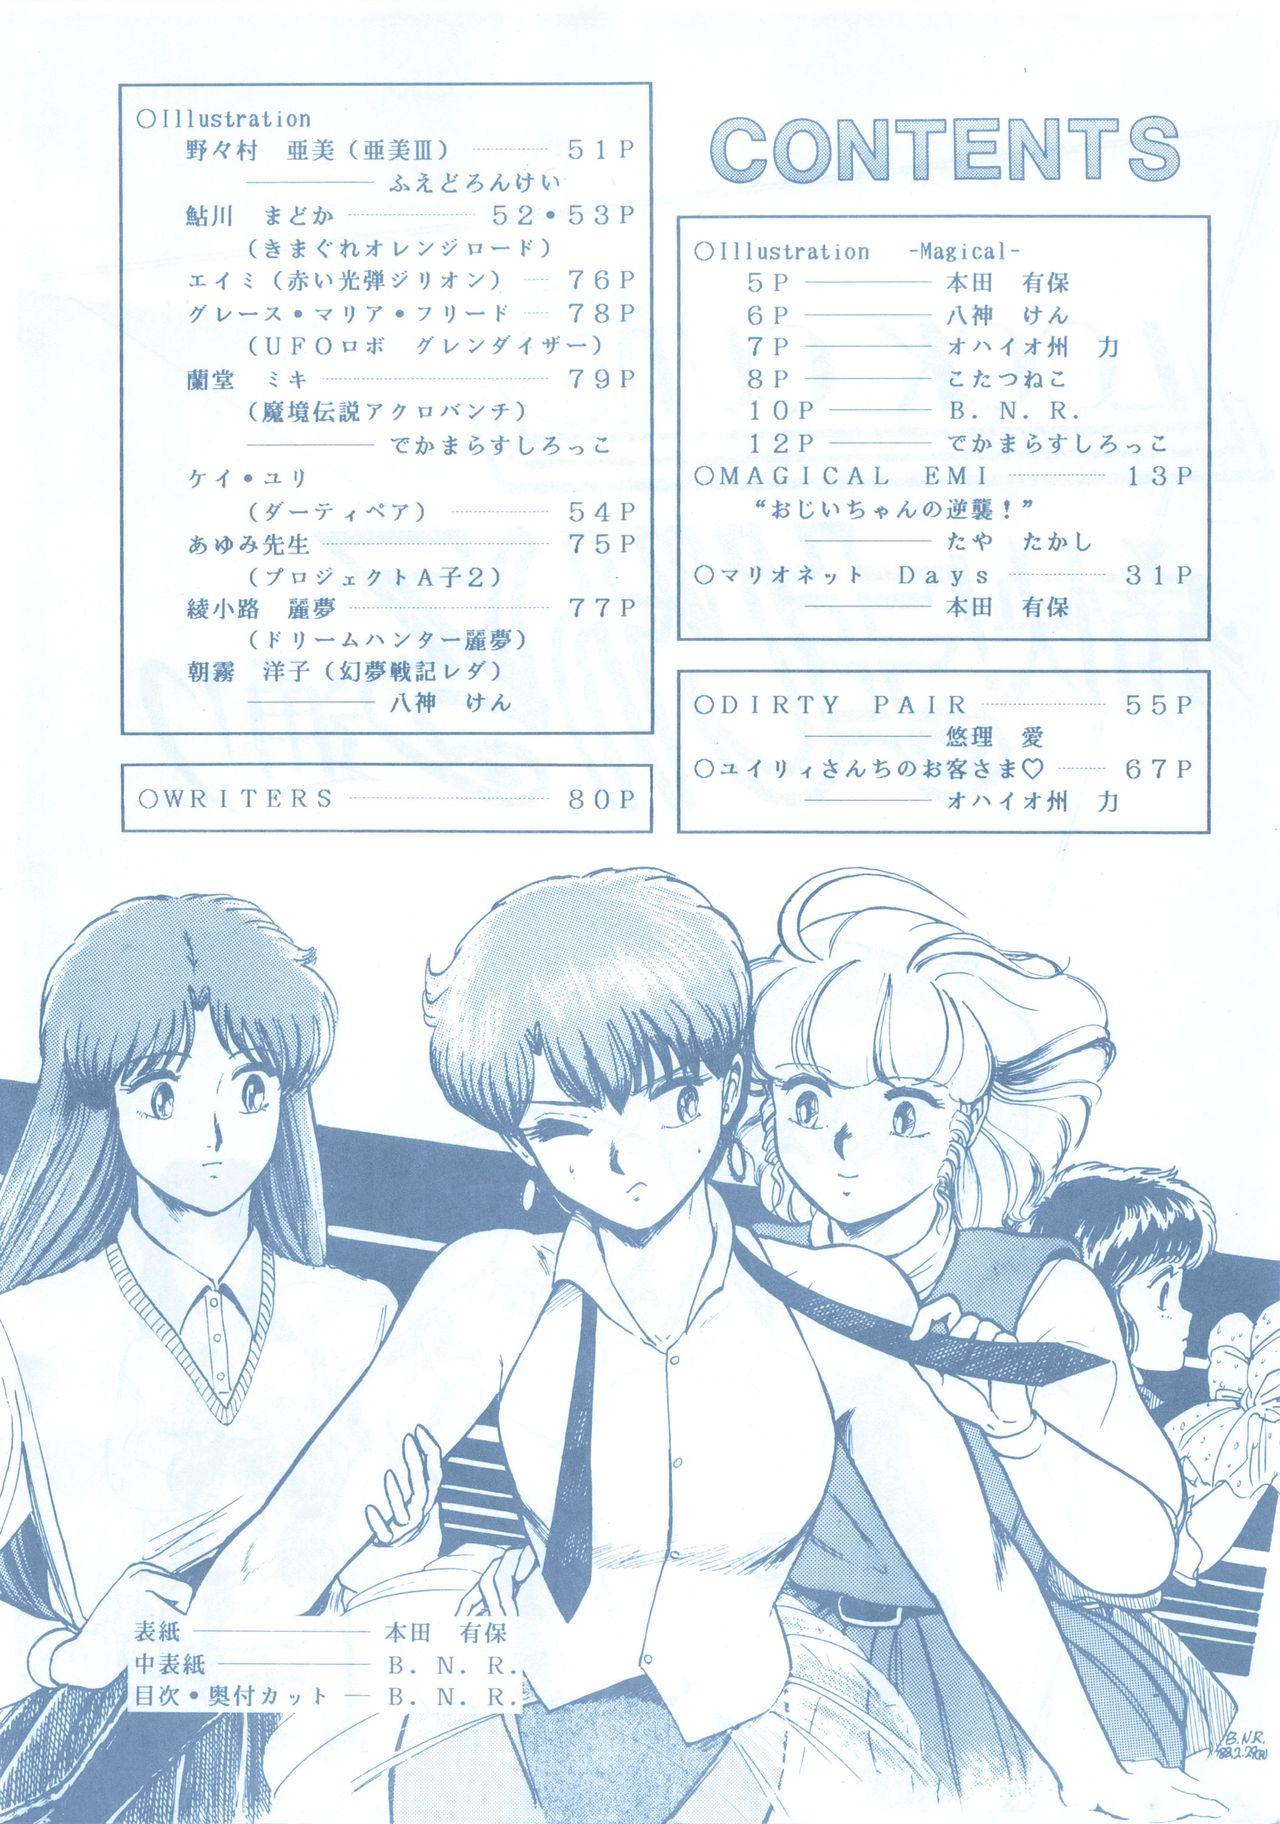 Shorts LOOK OUT 13 - Dirty pair Magical emi Zeta gundam Wild - Page 4